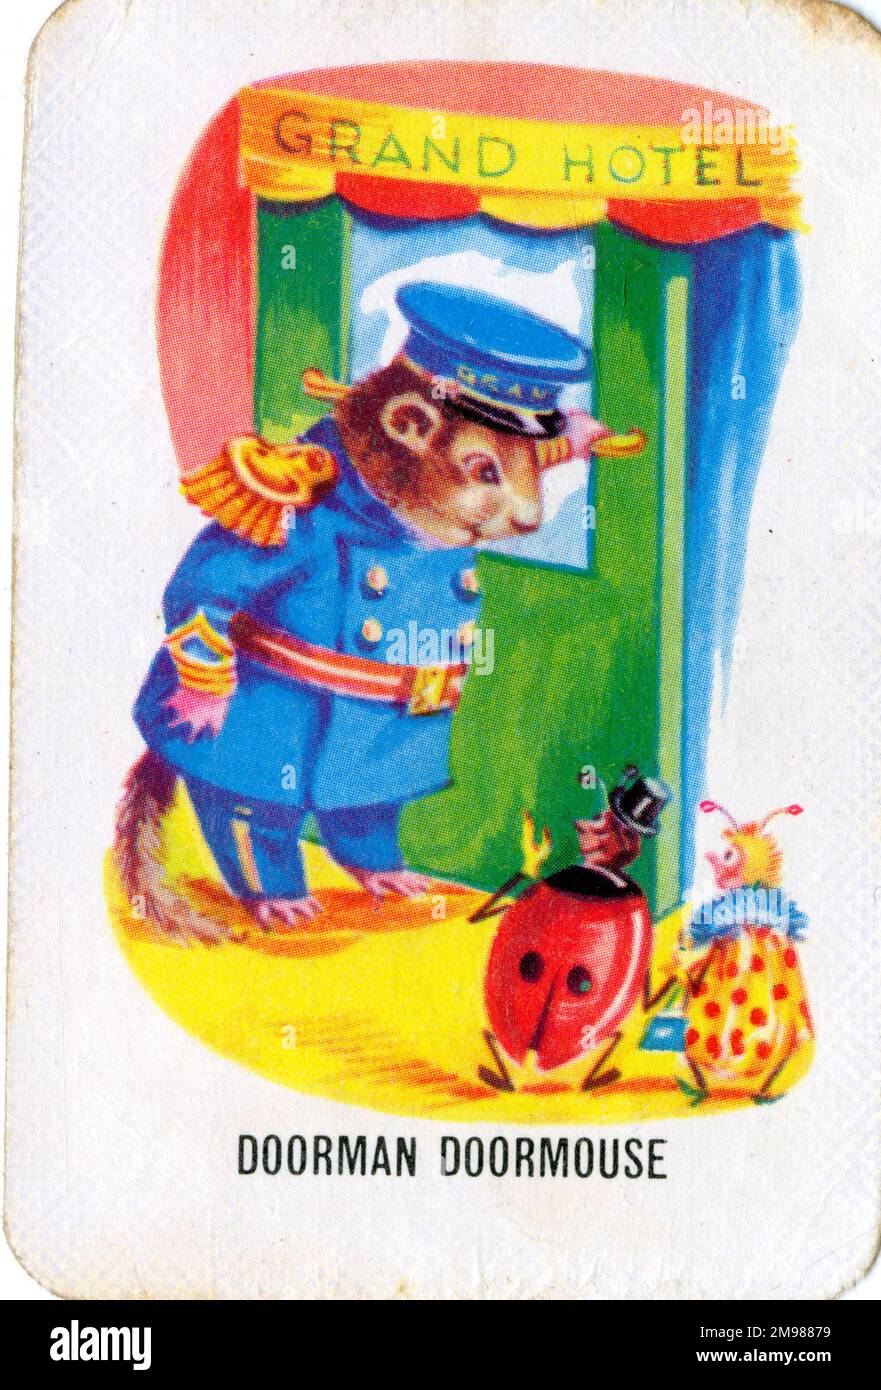 Old Maid card game - Doorman Dormouse. Stock Photo